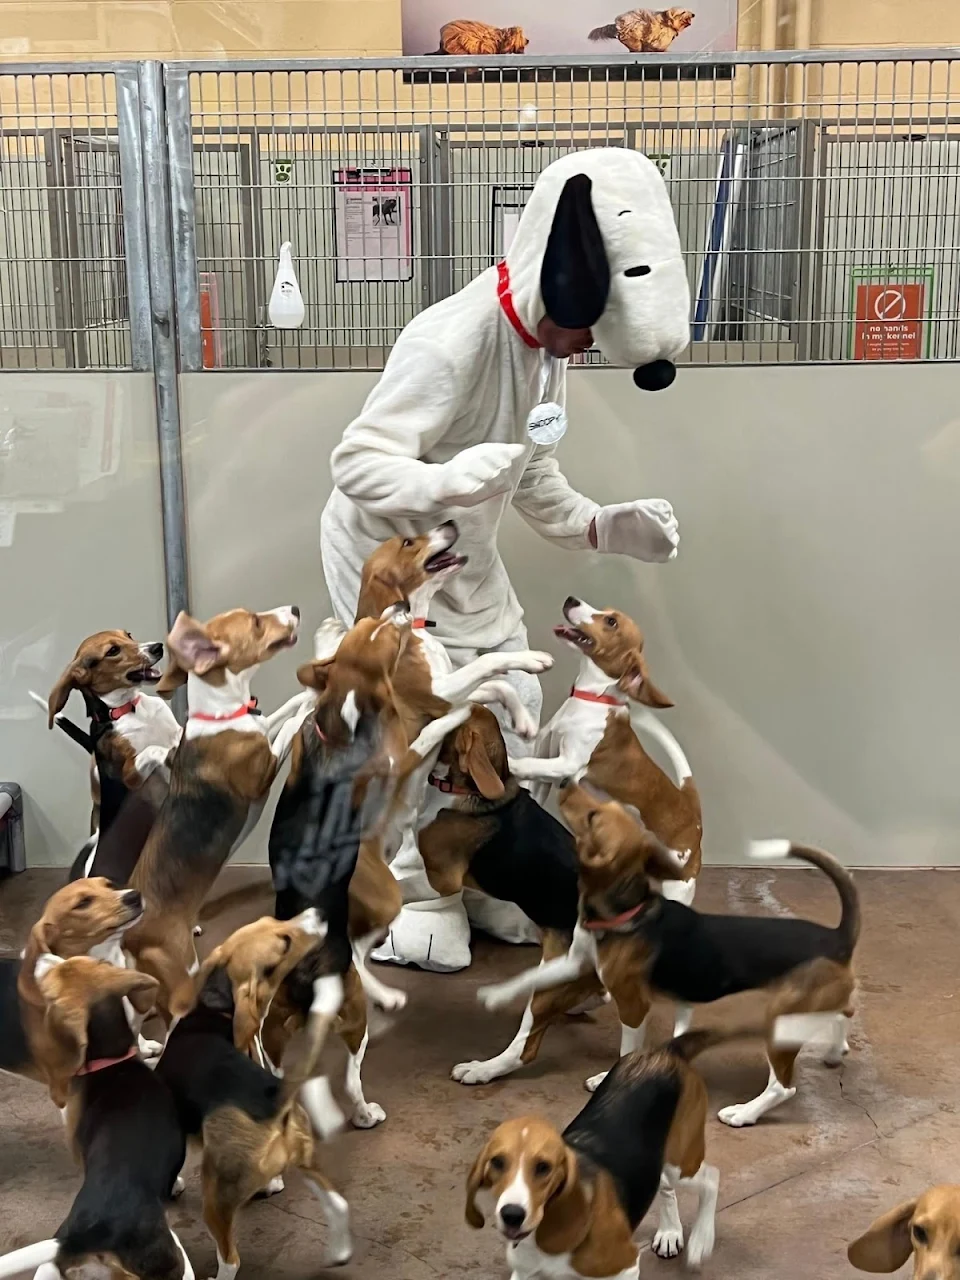 Beagle puppies rescued from a medical testing facility got to meet Snoopy.